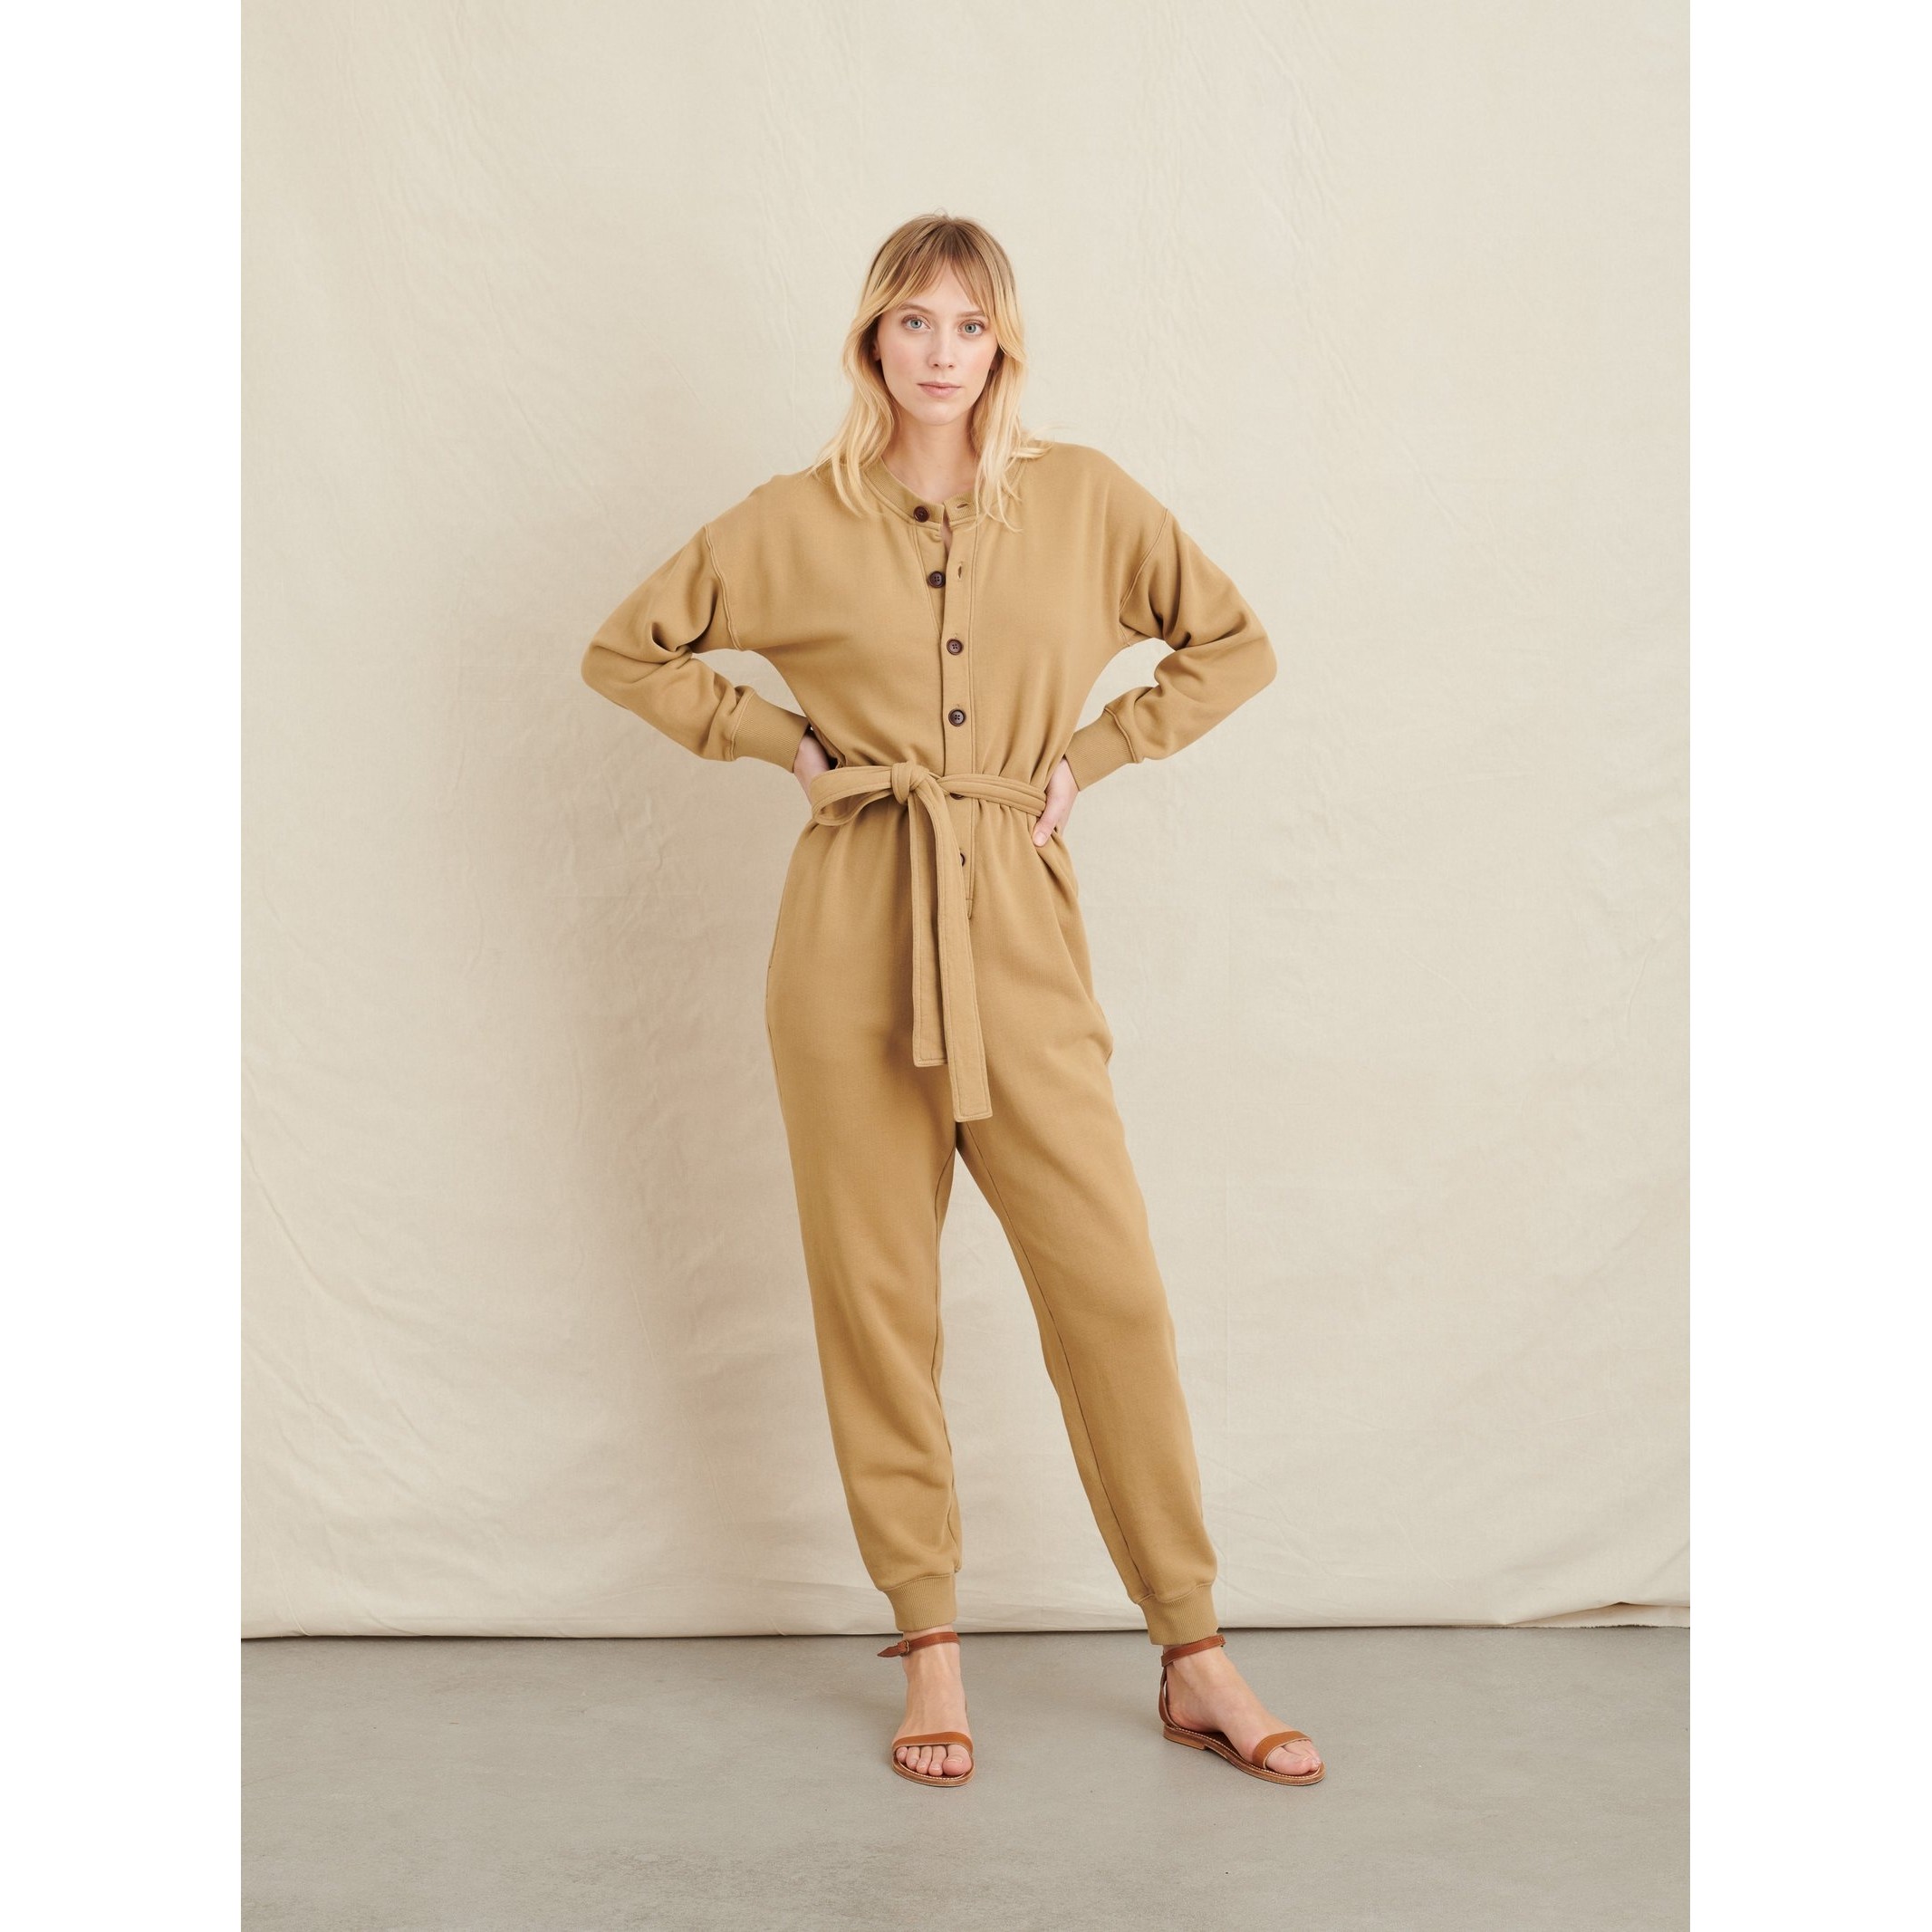 Alex Mill French Terry Jumpsuit: Vintage Khaki Womens Dresses and Jumpsuits at The Stockist